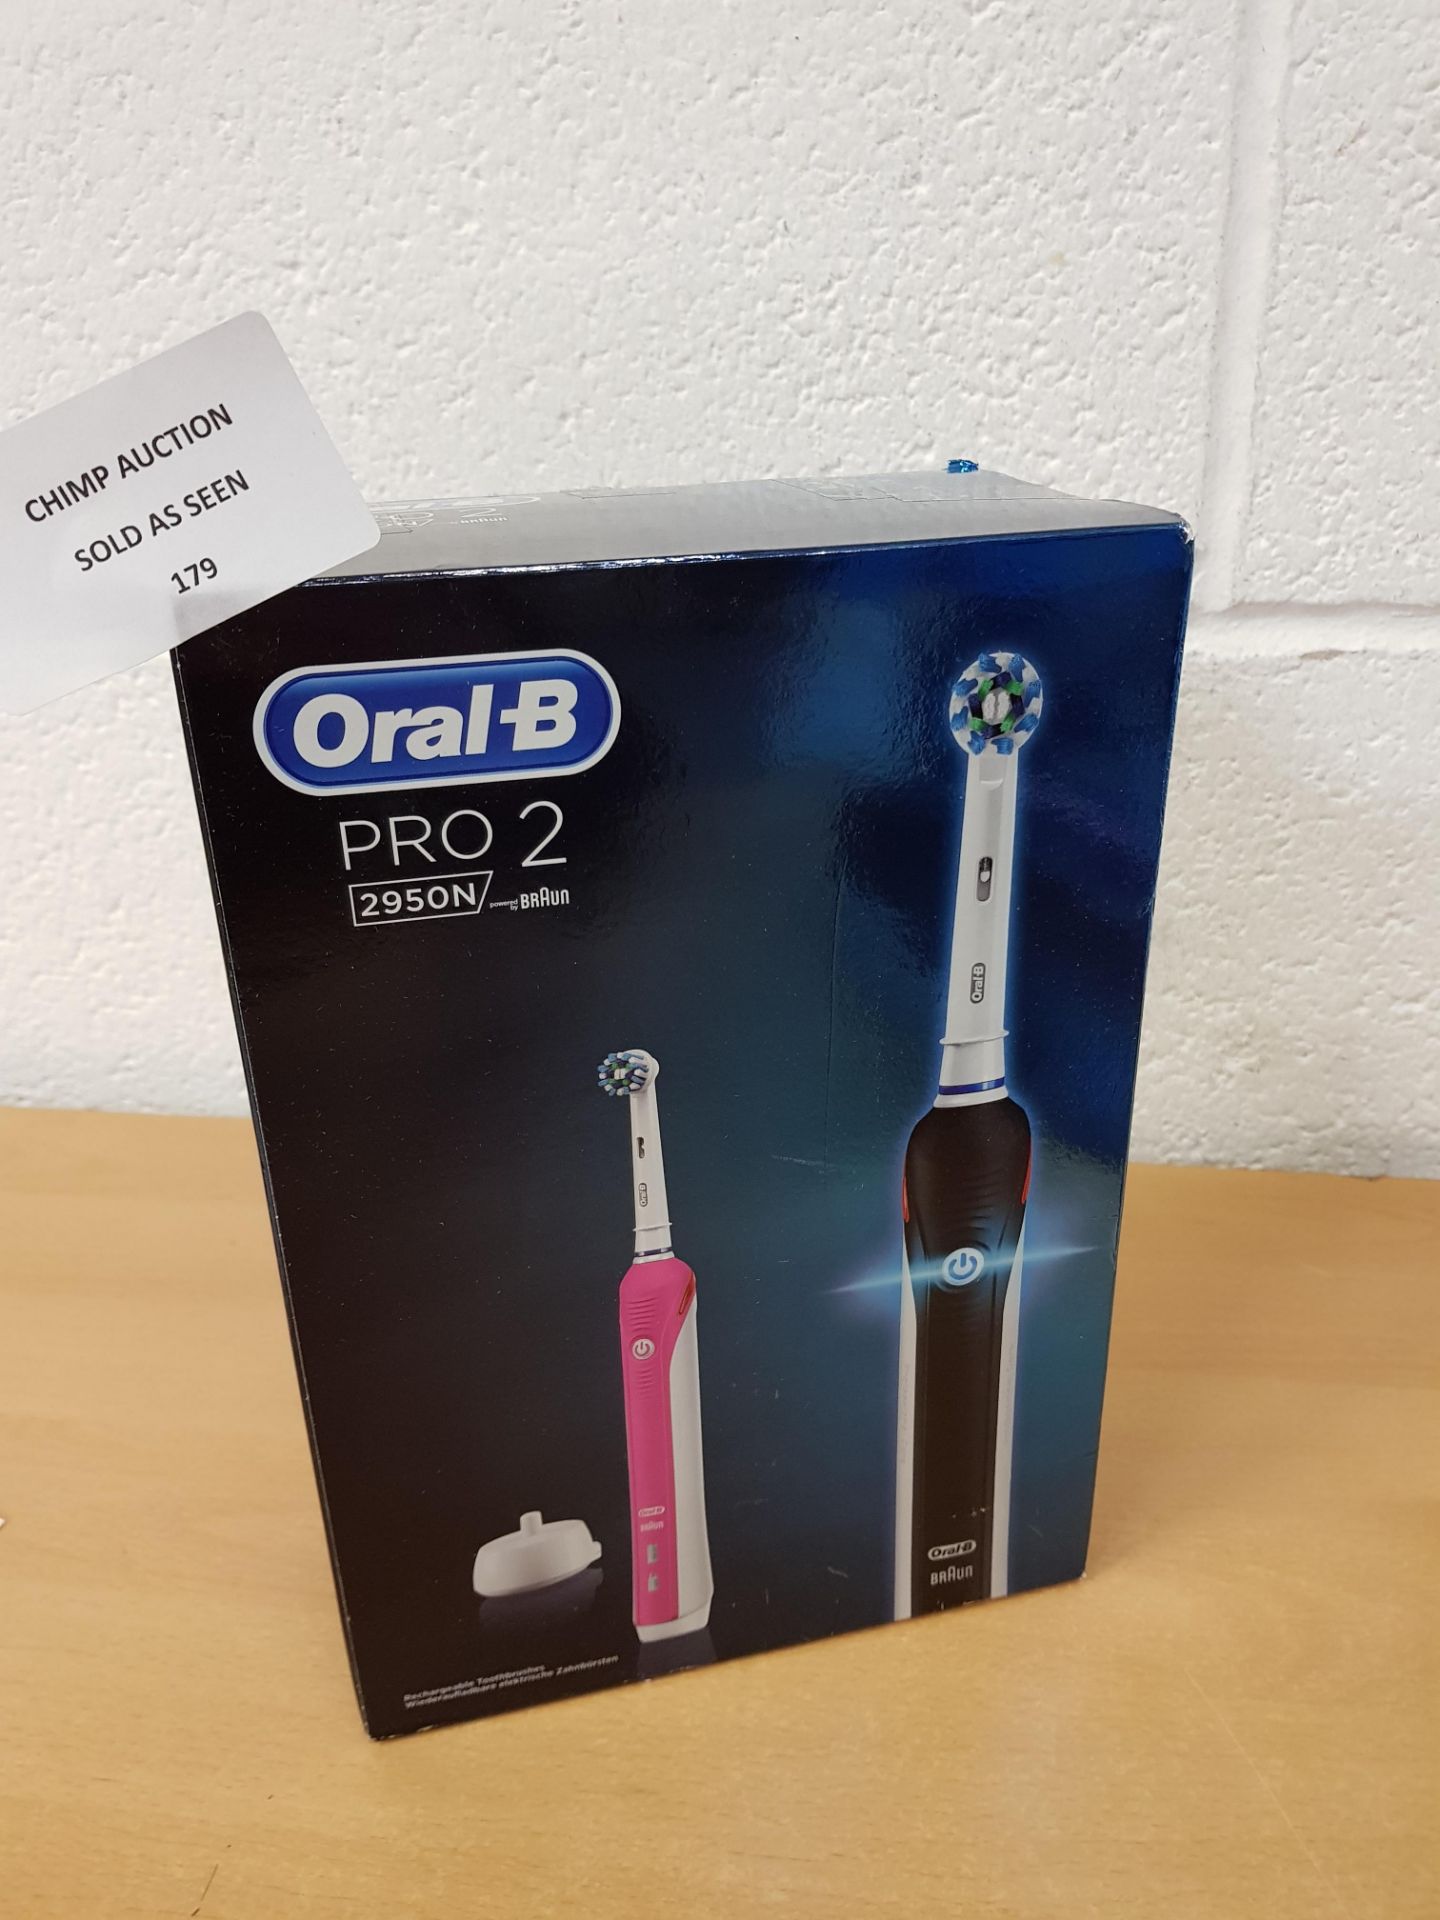 Oral-B Pro 2 TWIN edition electric Toothbrush